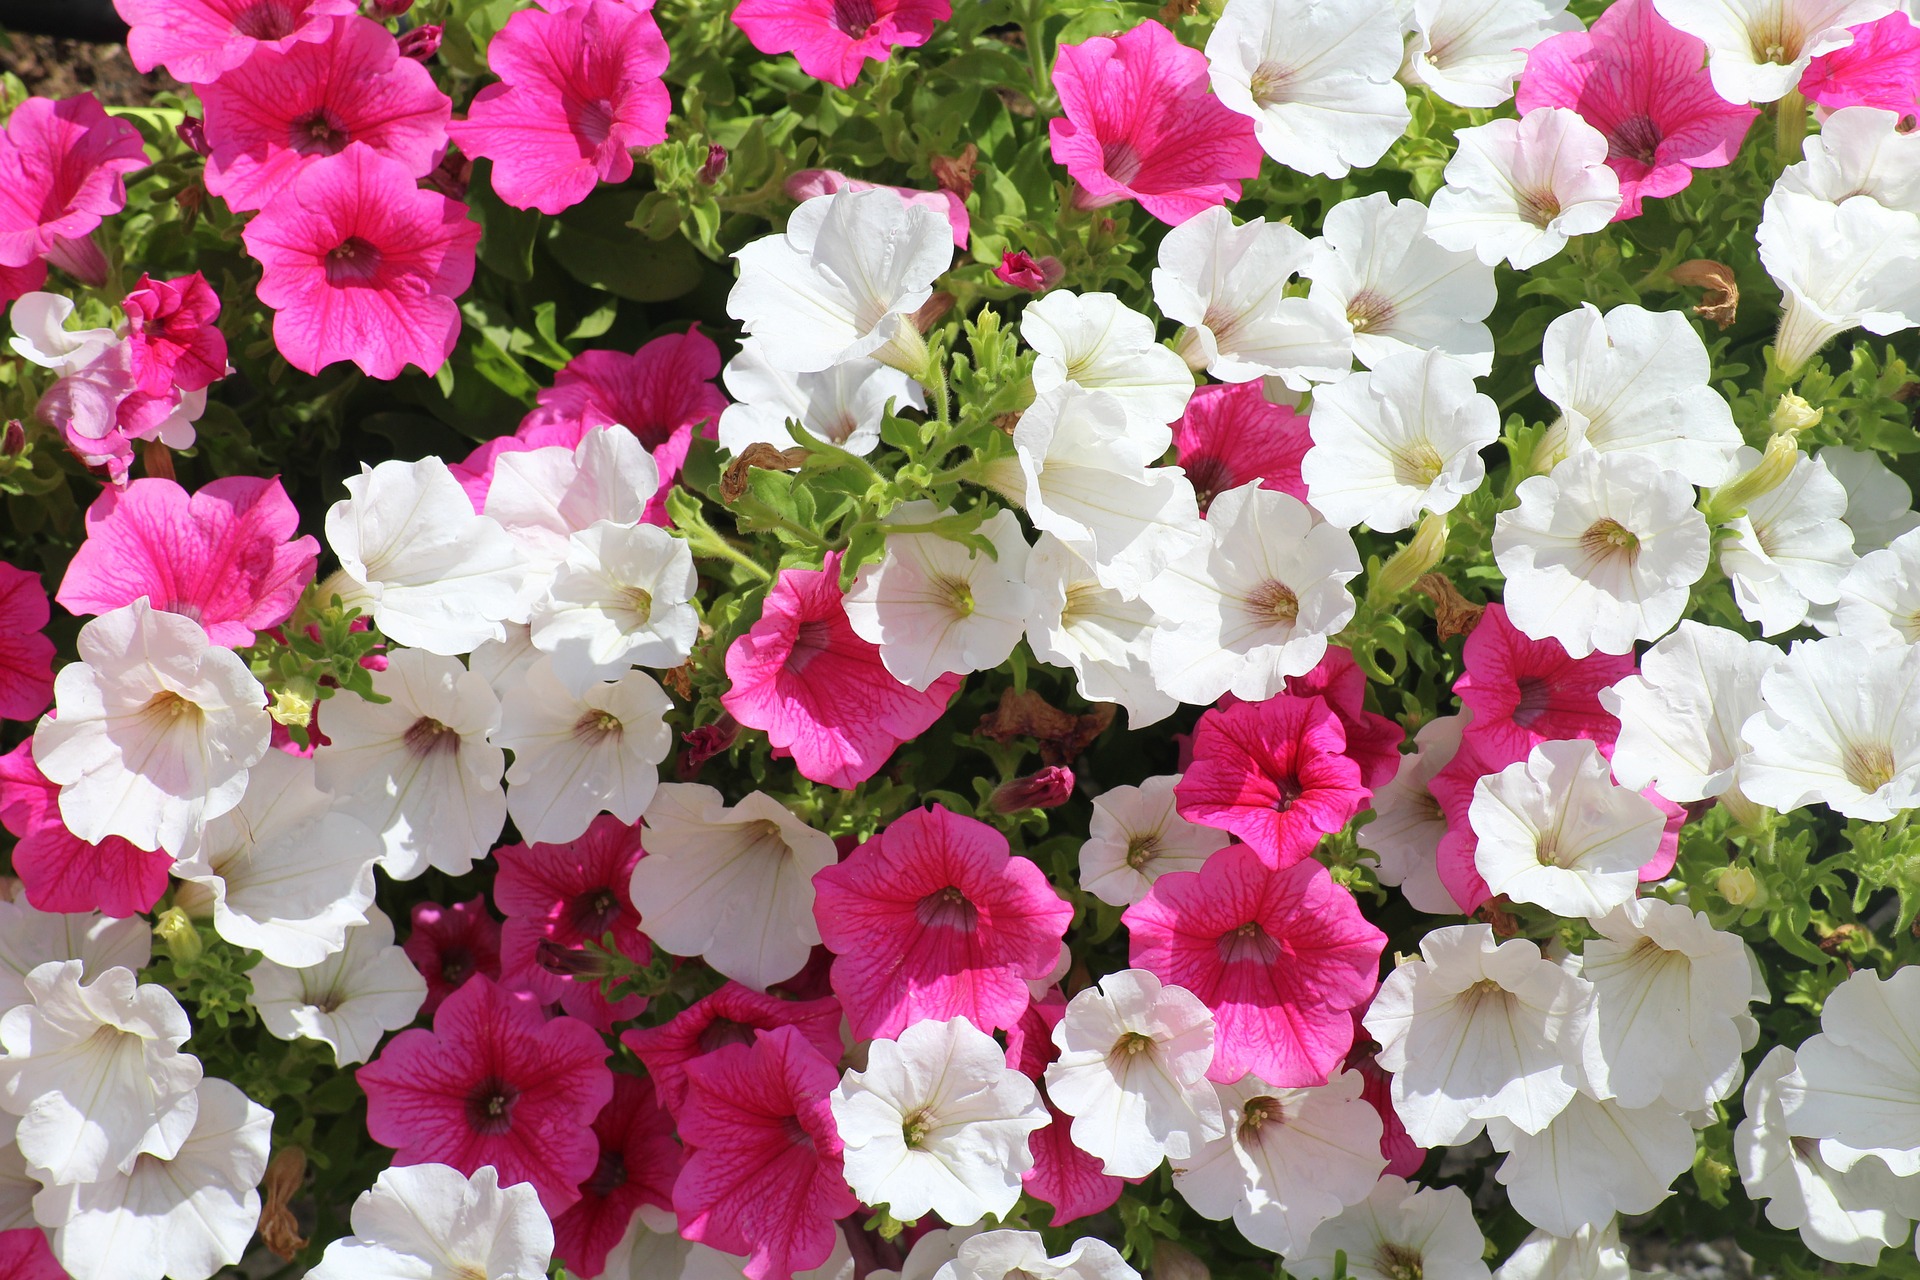 pink and white Petunia flower blooms